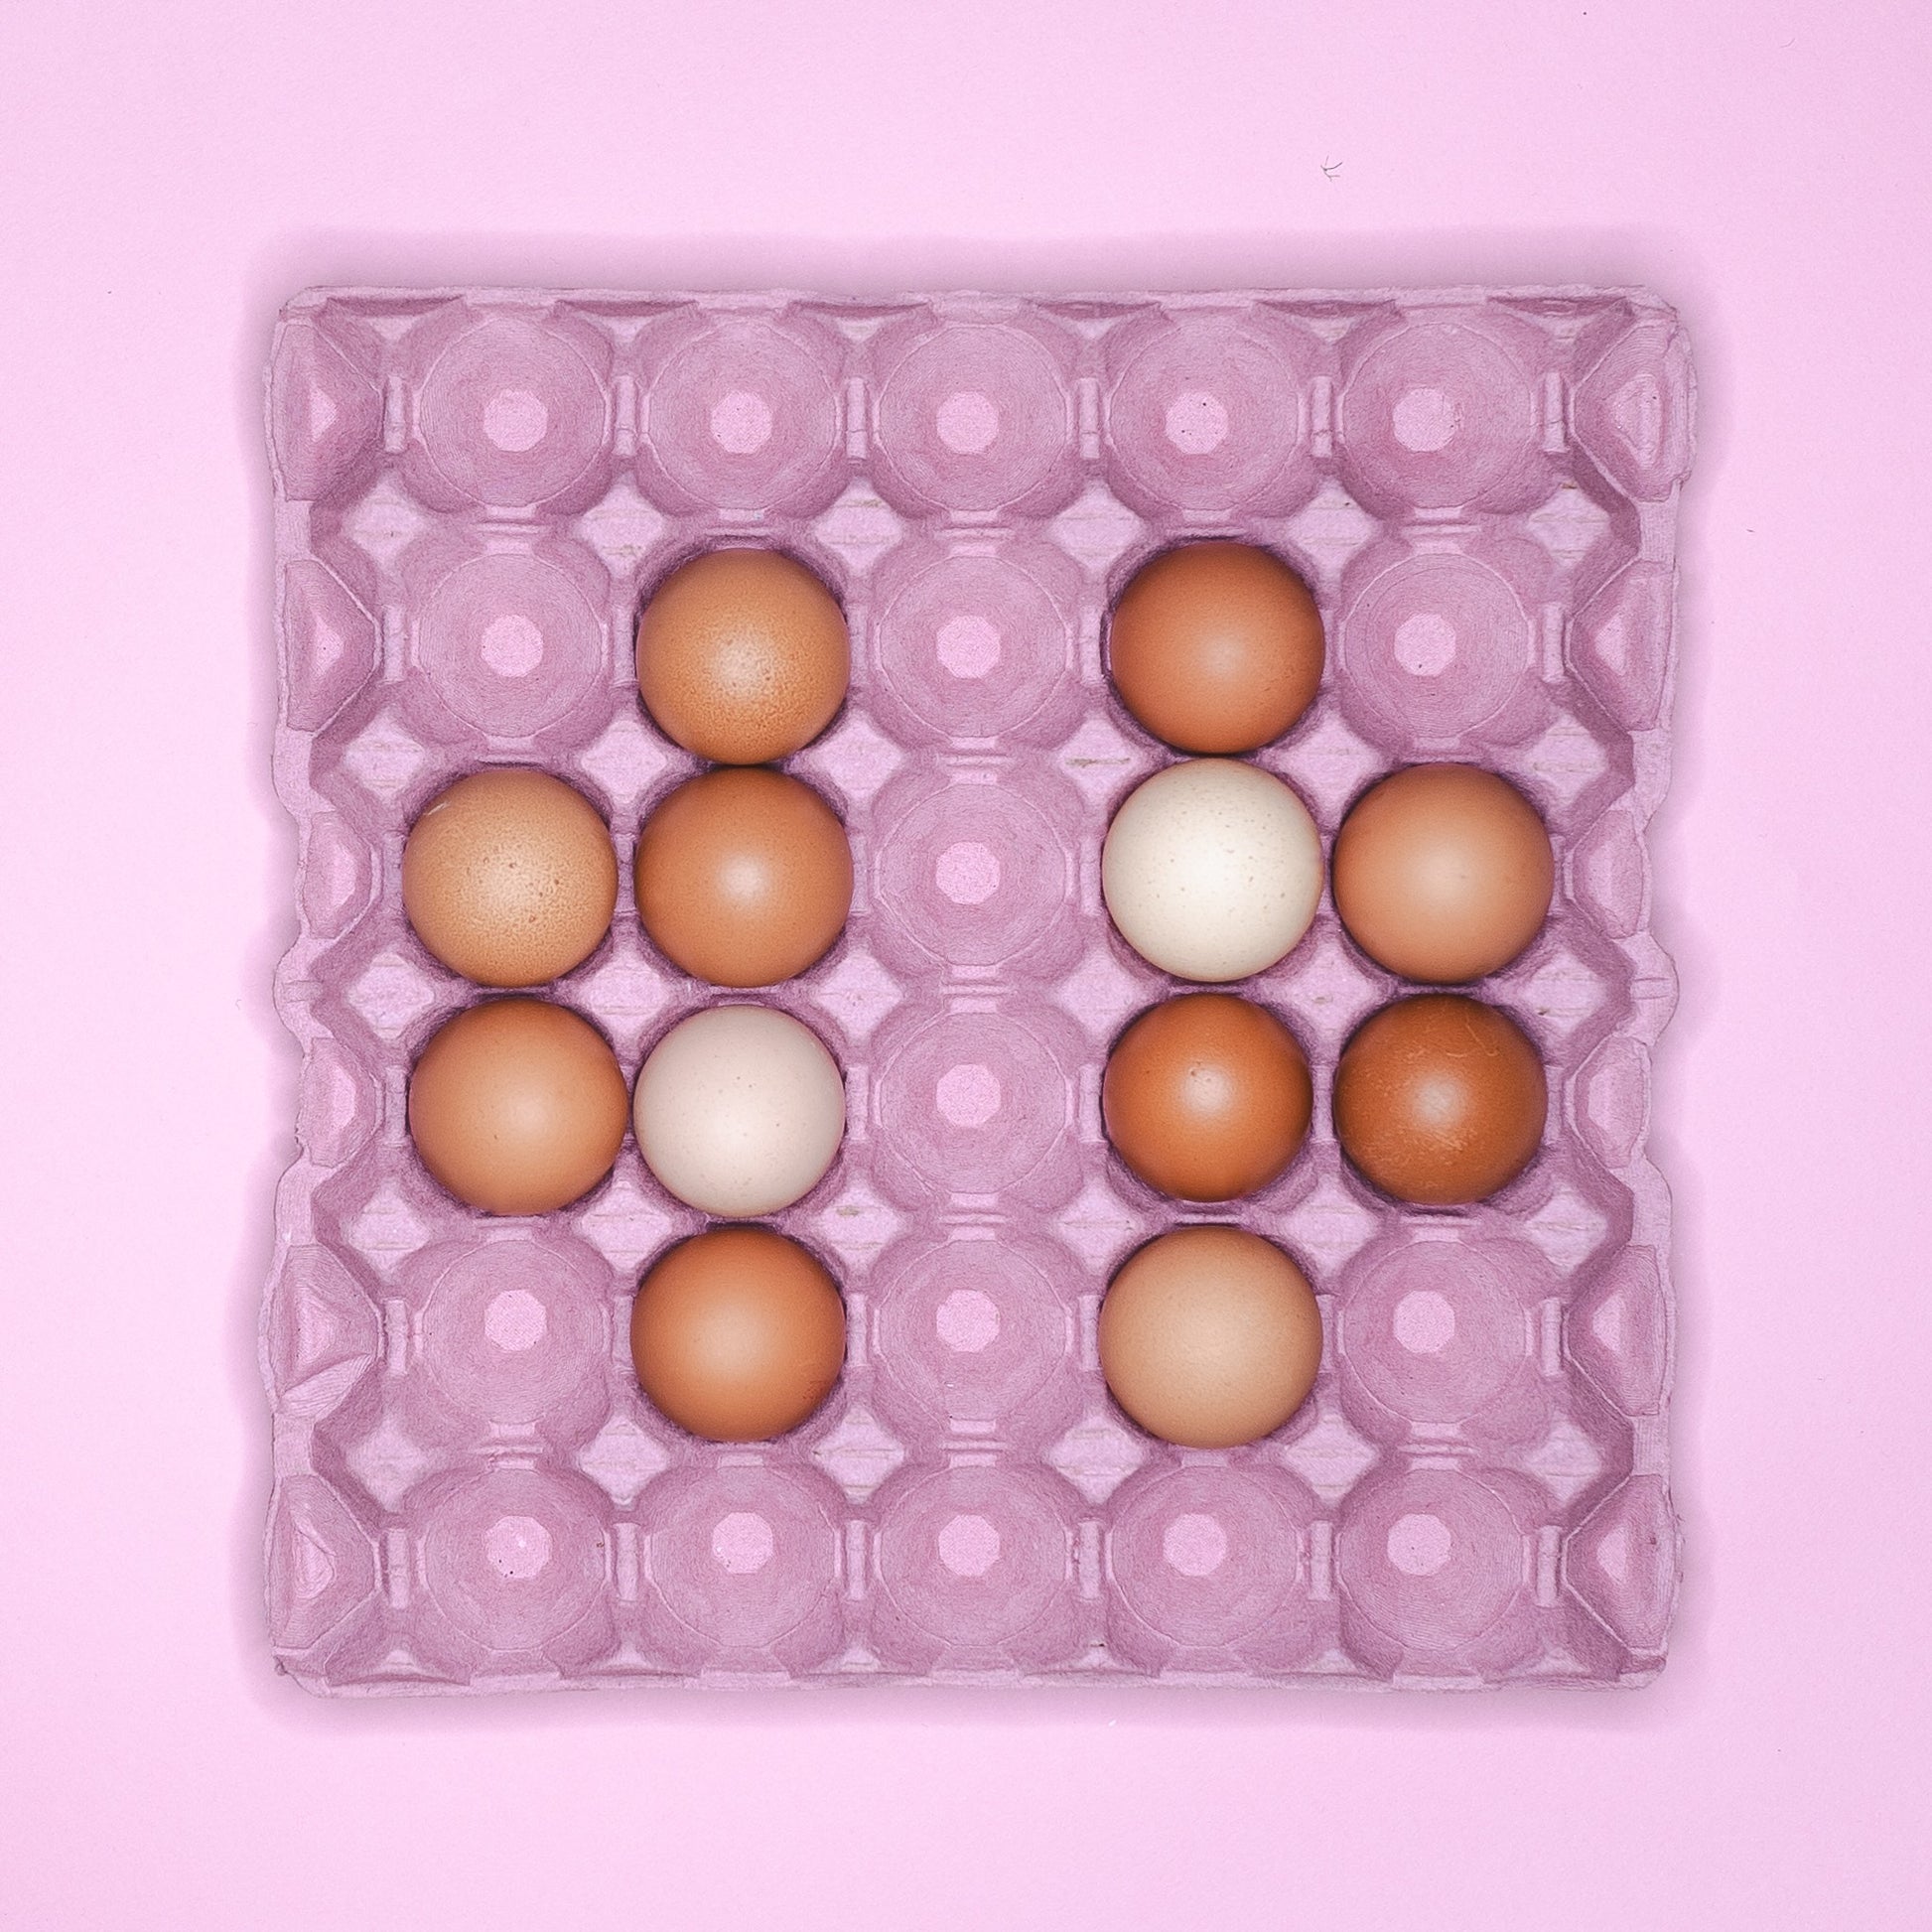 A pink cardboard tray holding 12 eggs